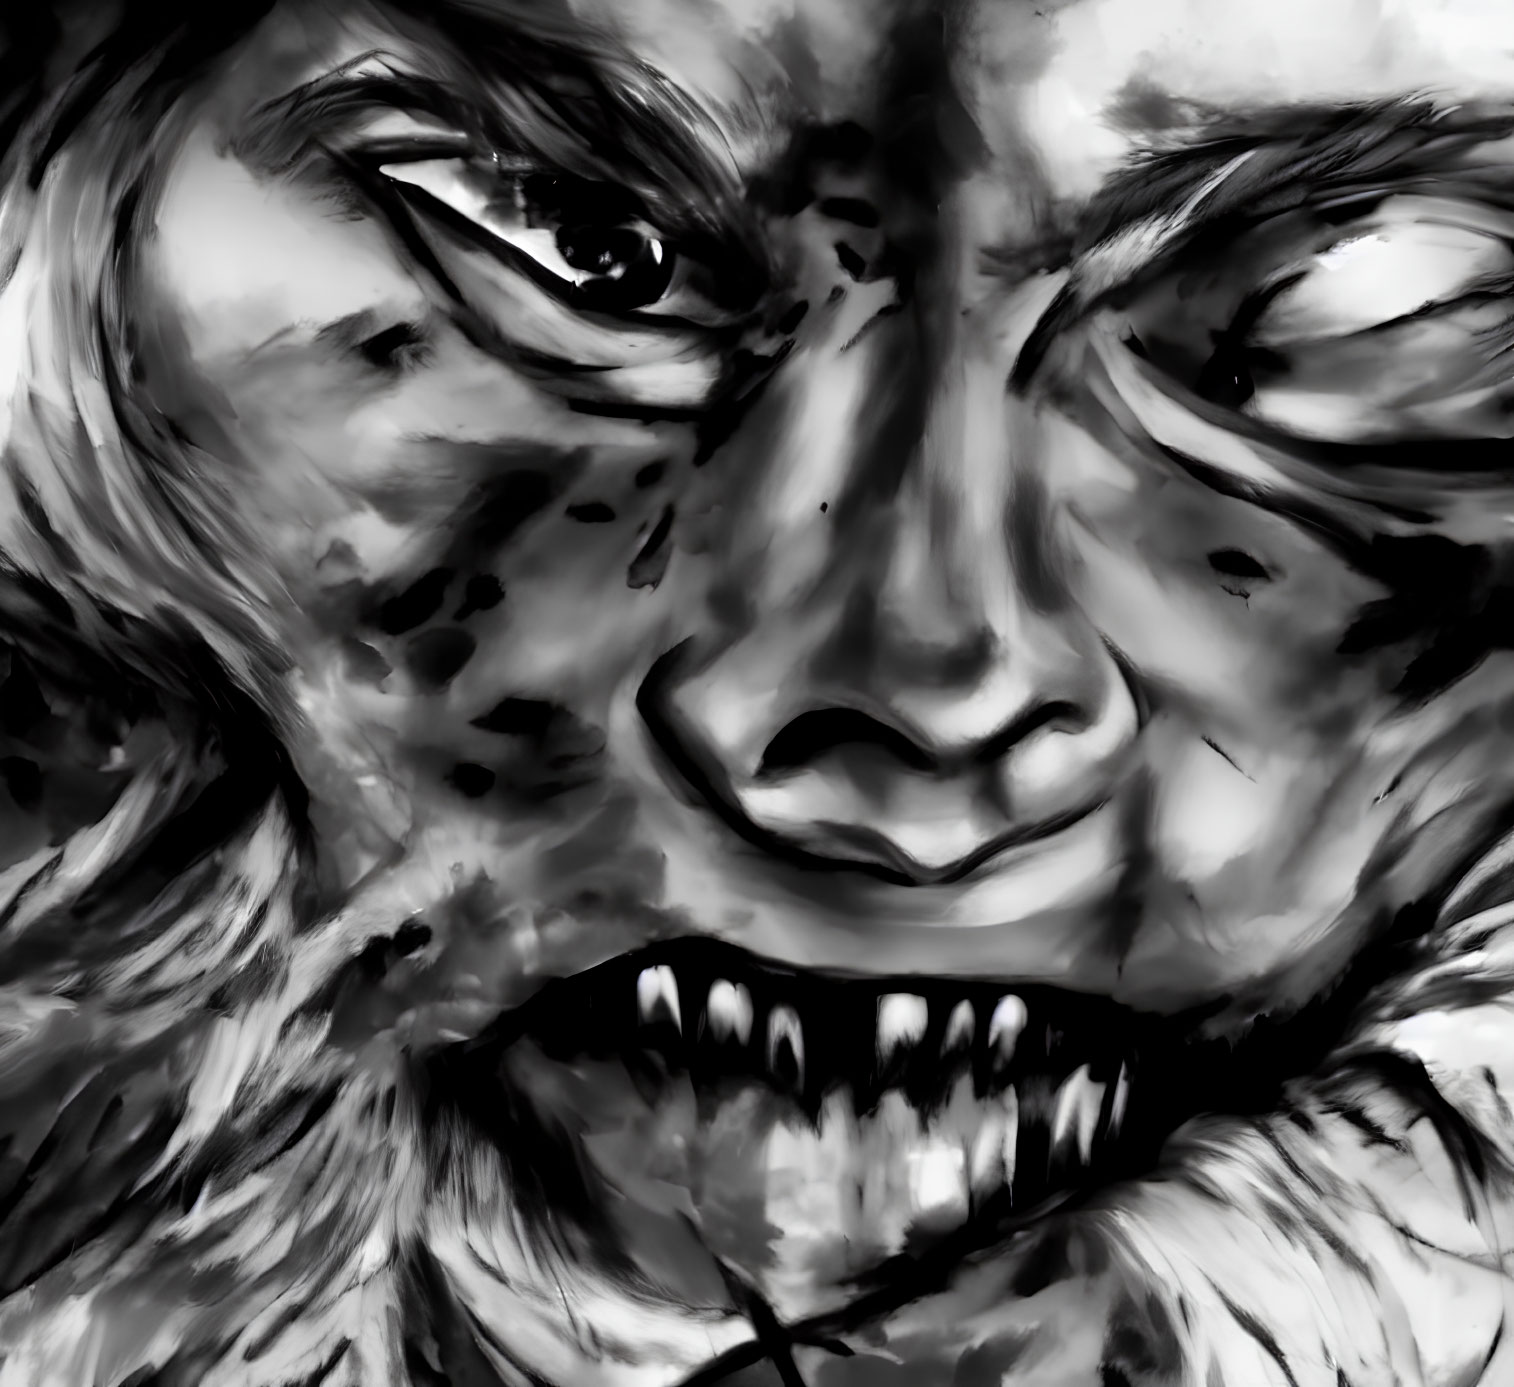 Monochrome illustration of fierce, snarling face with menacing eyes and sharp teeth